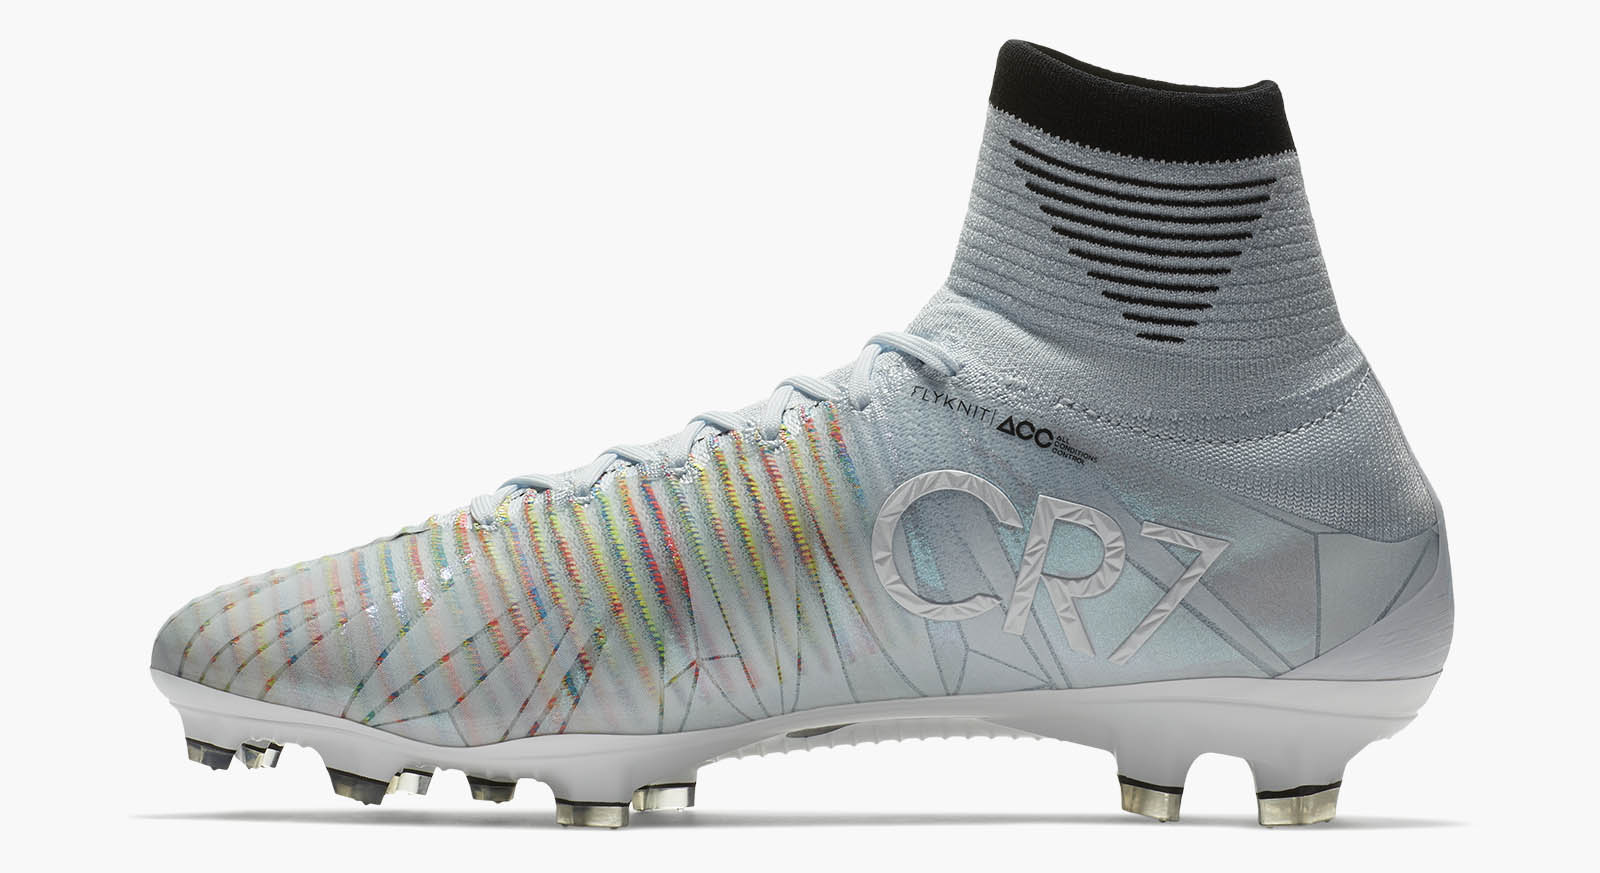 Nike Mercurial Superfly V Cristiano Ronaldo Chapter 5 'Cut to Brilliance' Boots - Footy Headlines